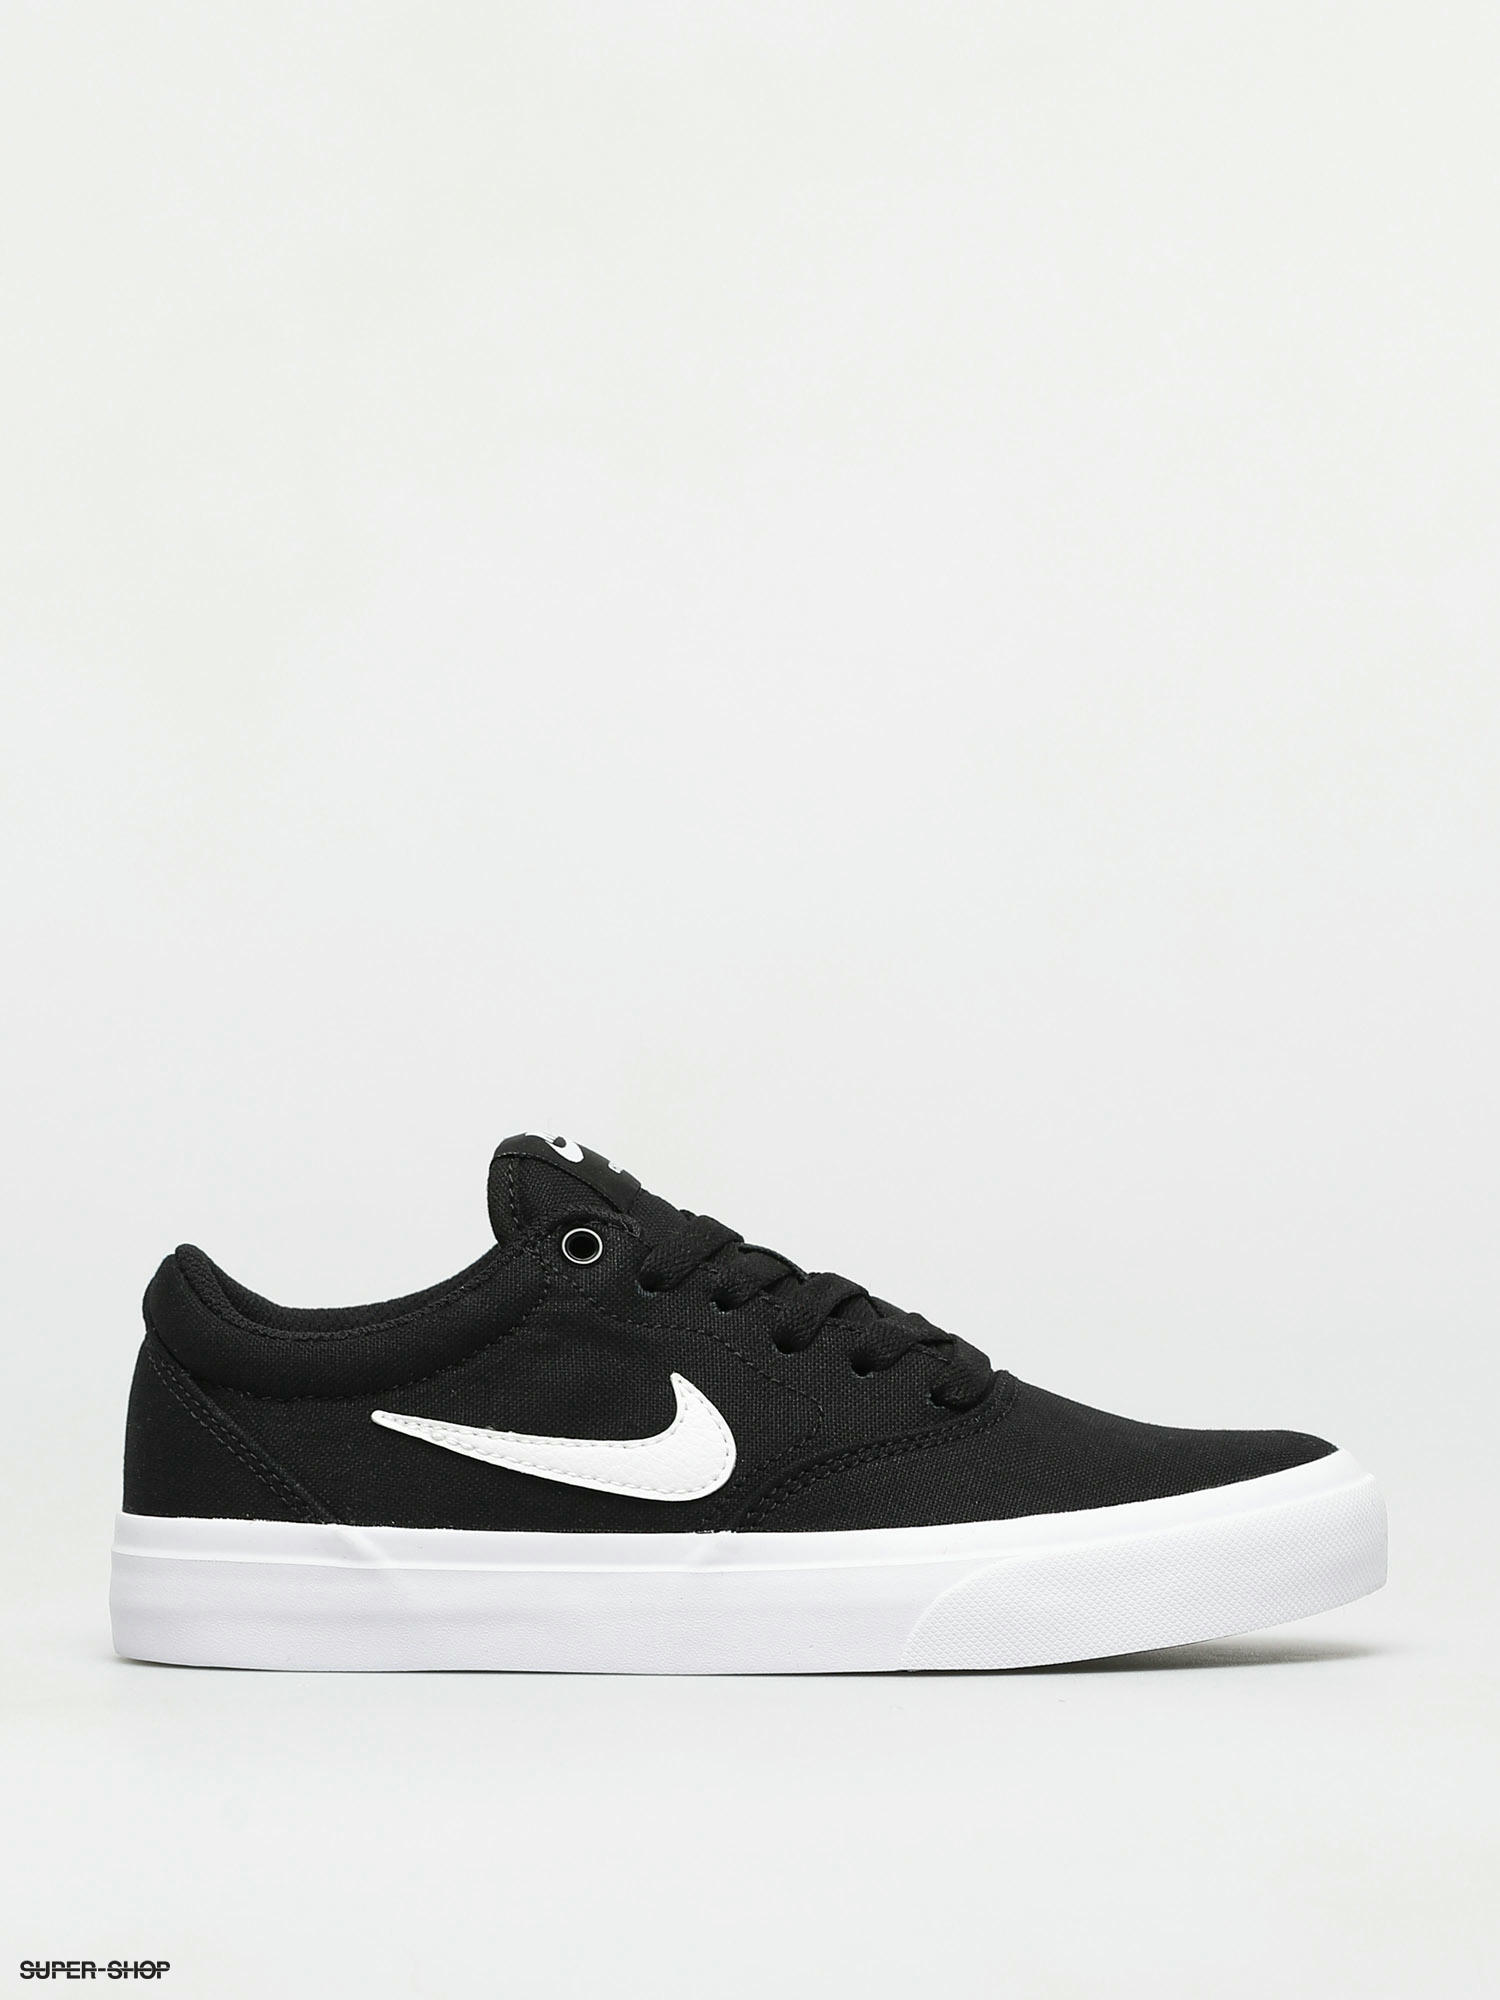 nike sneakers black and white